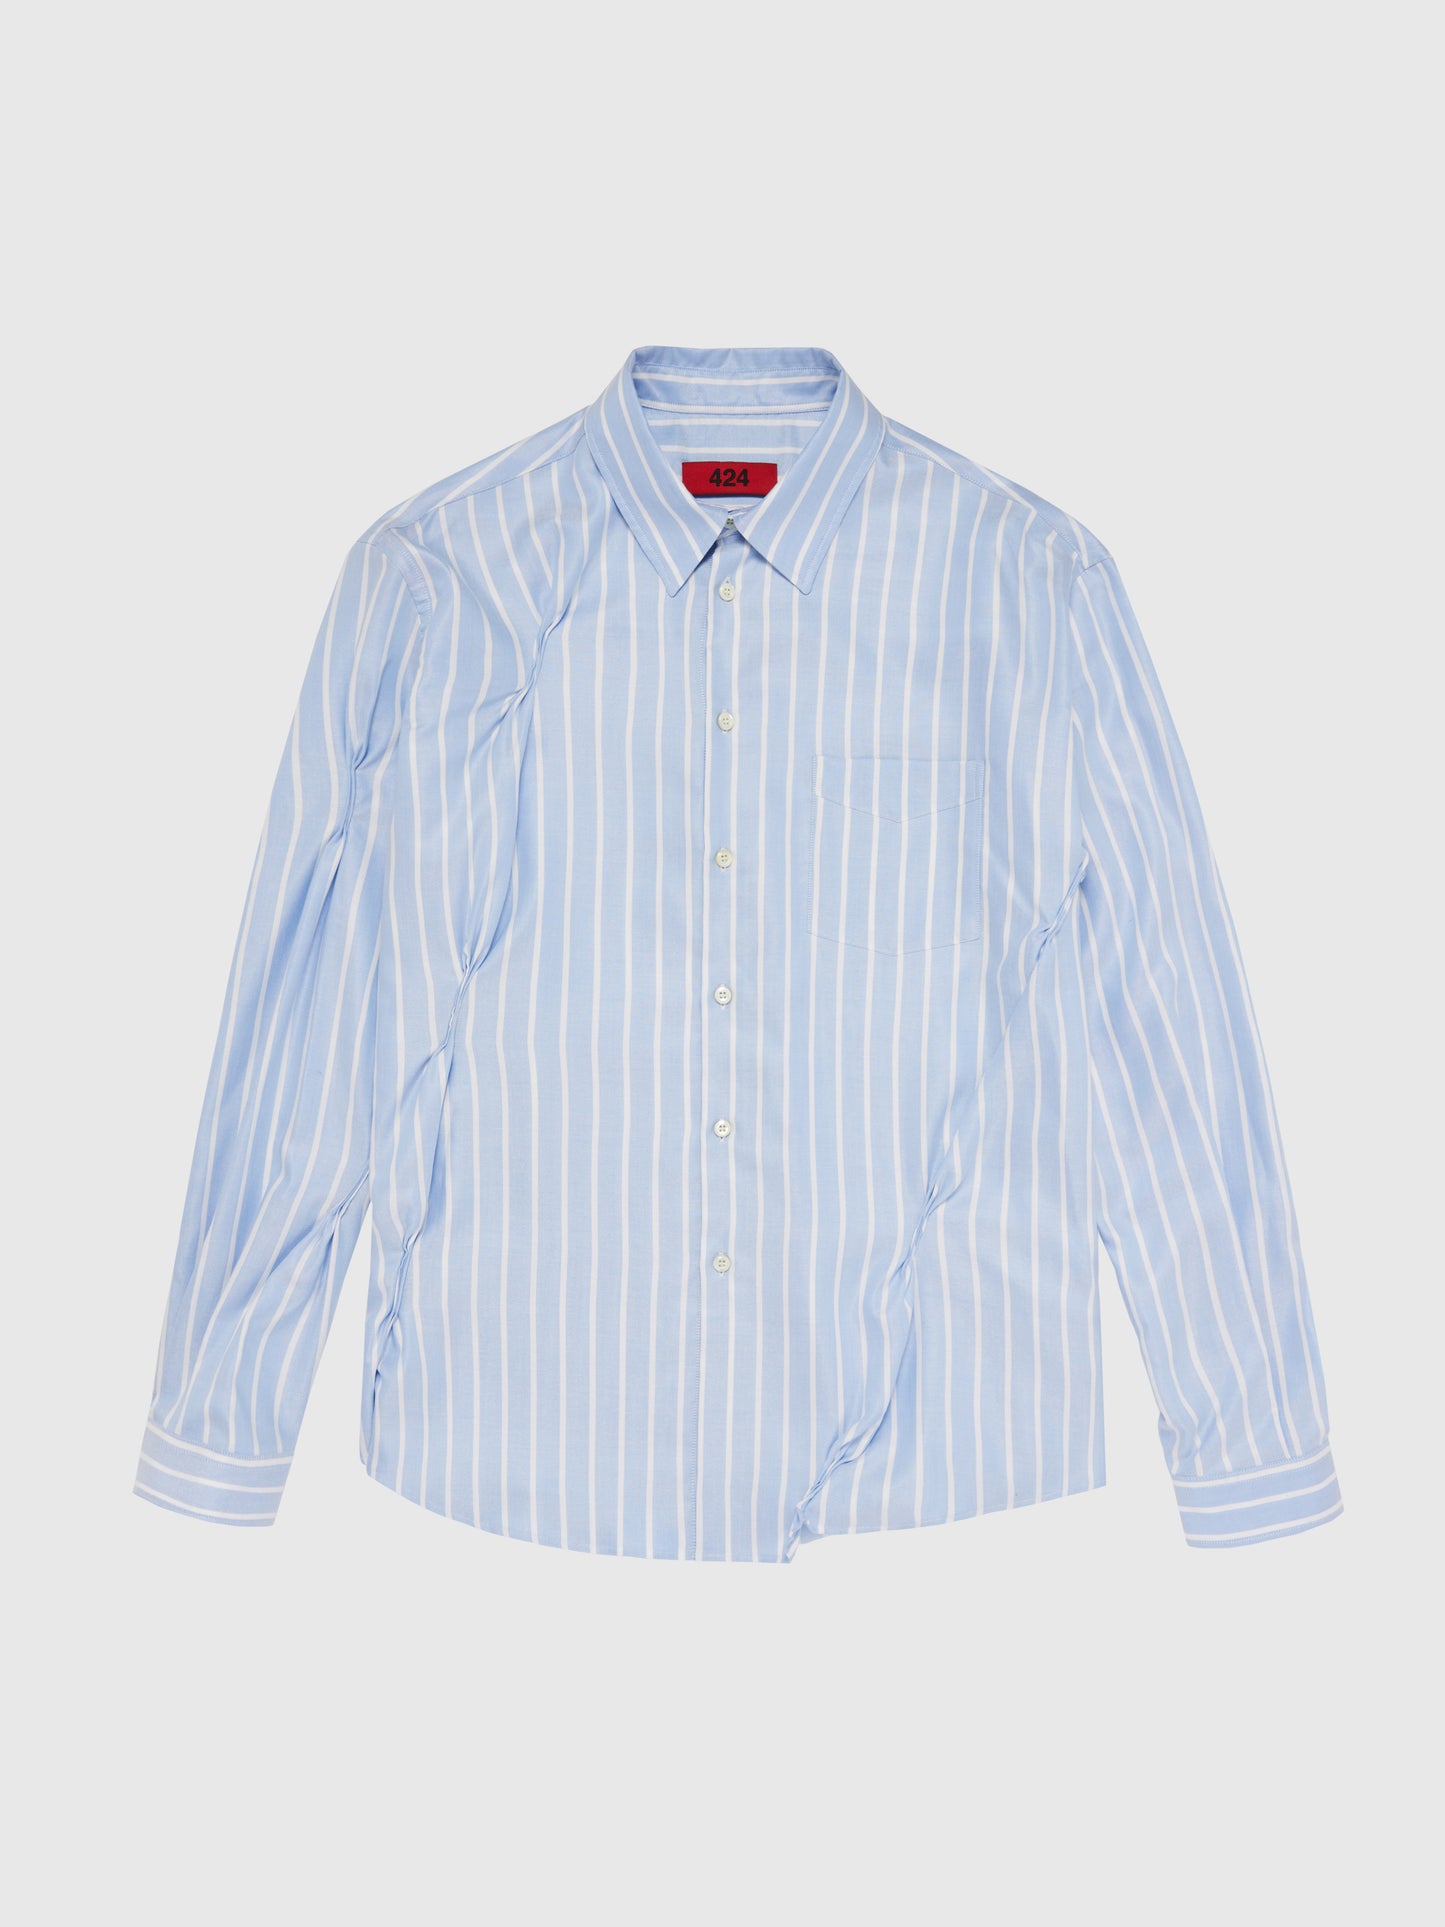 BLUE STRIPED LONG SLEEVE BUTTON UP